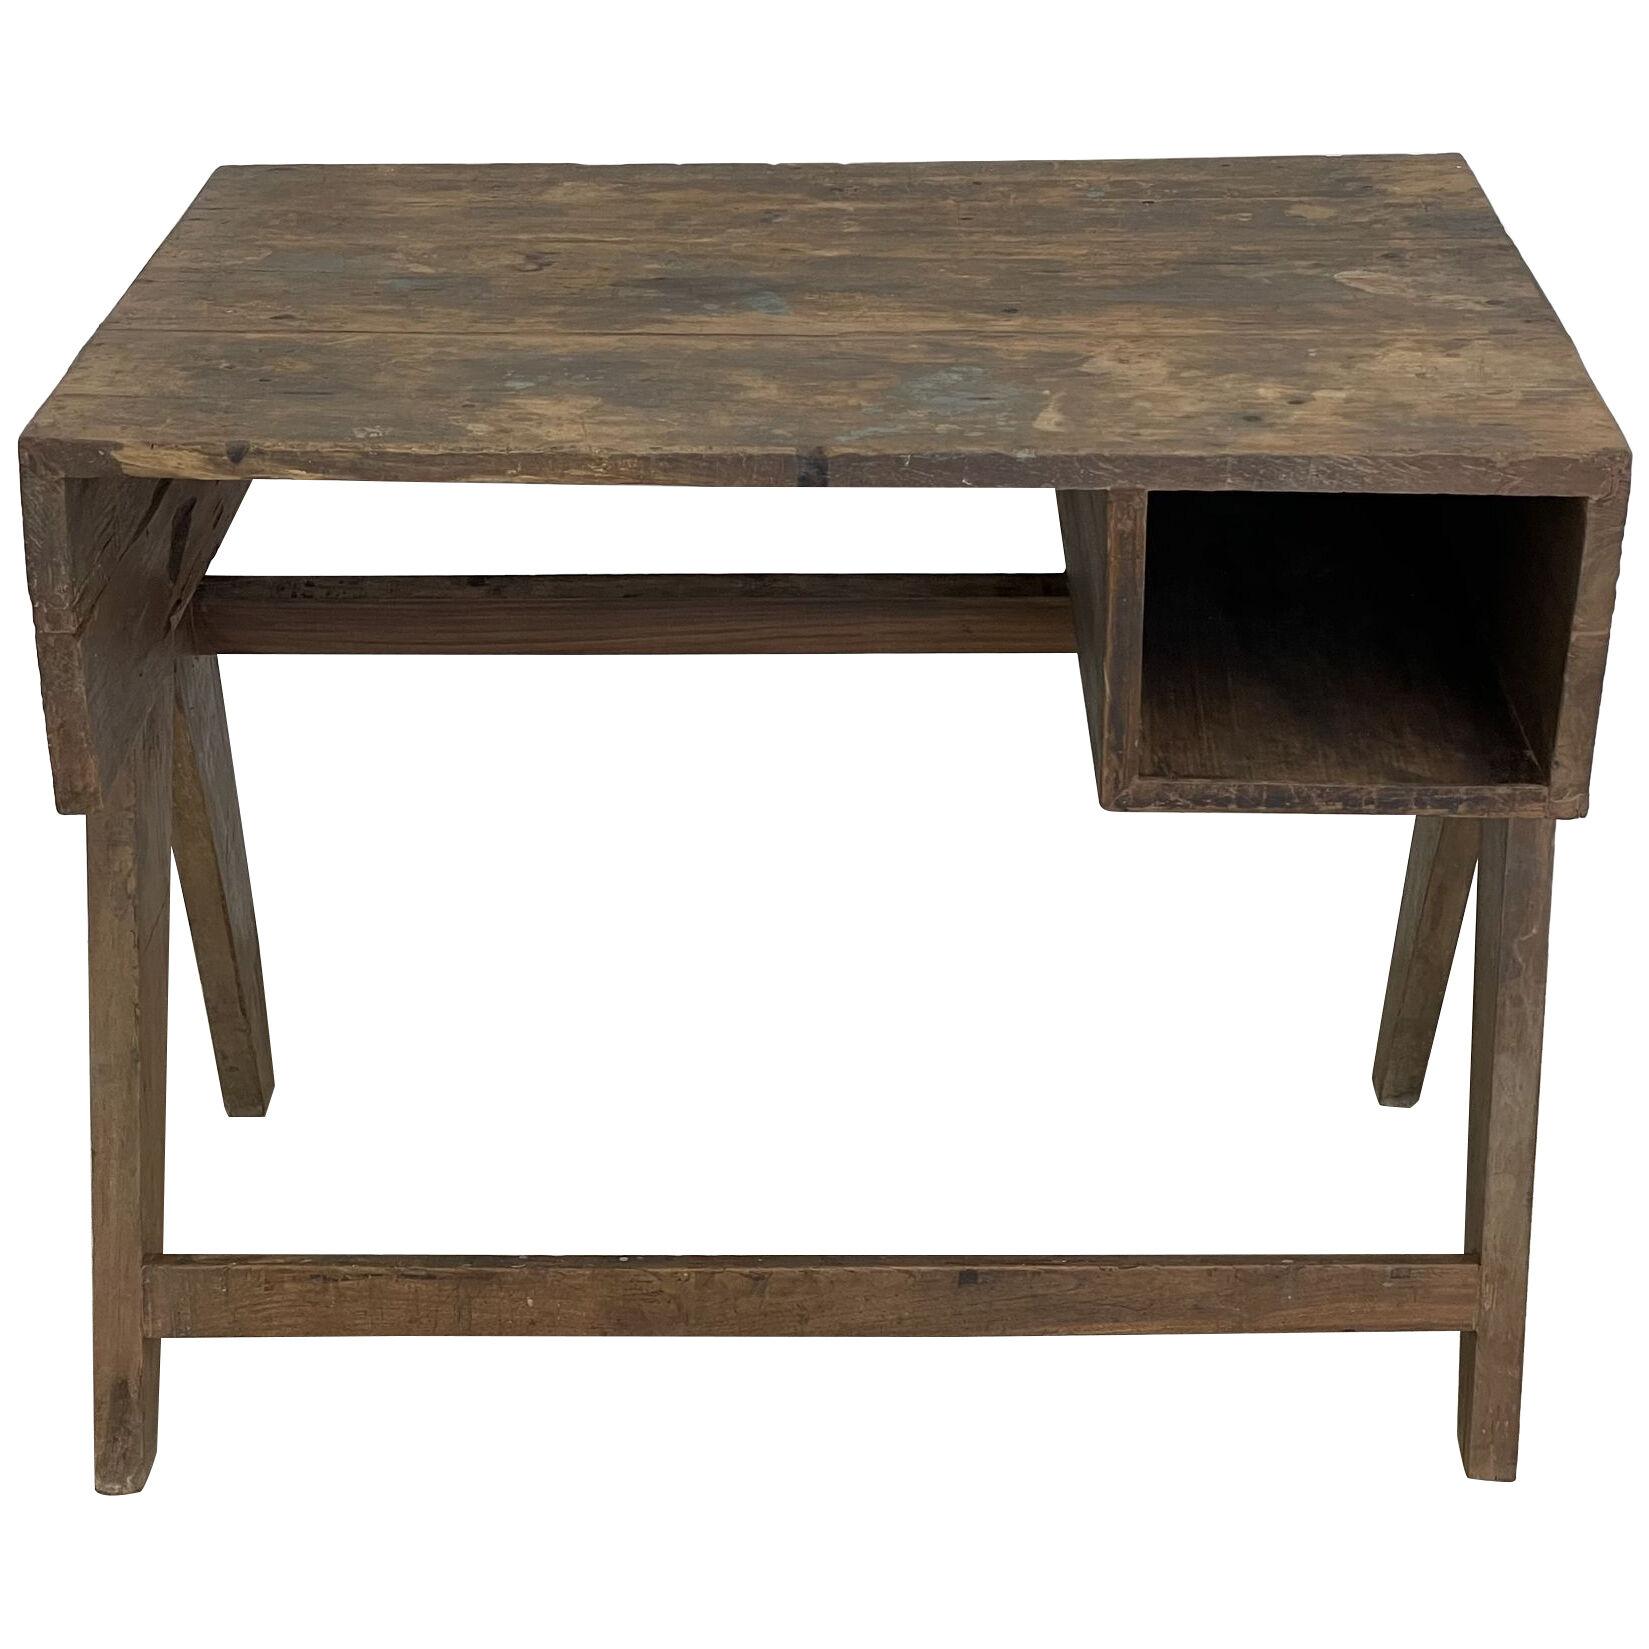 Authentic Pierre Jeanneret Study Desk / Writing Table, Mid-Century Modern